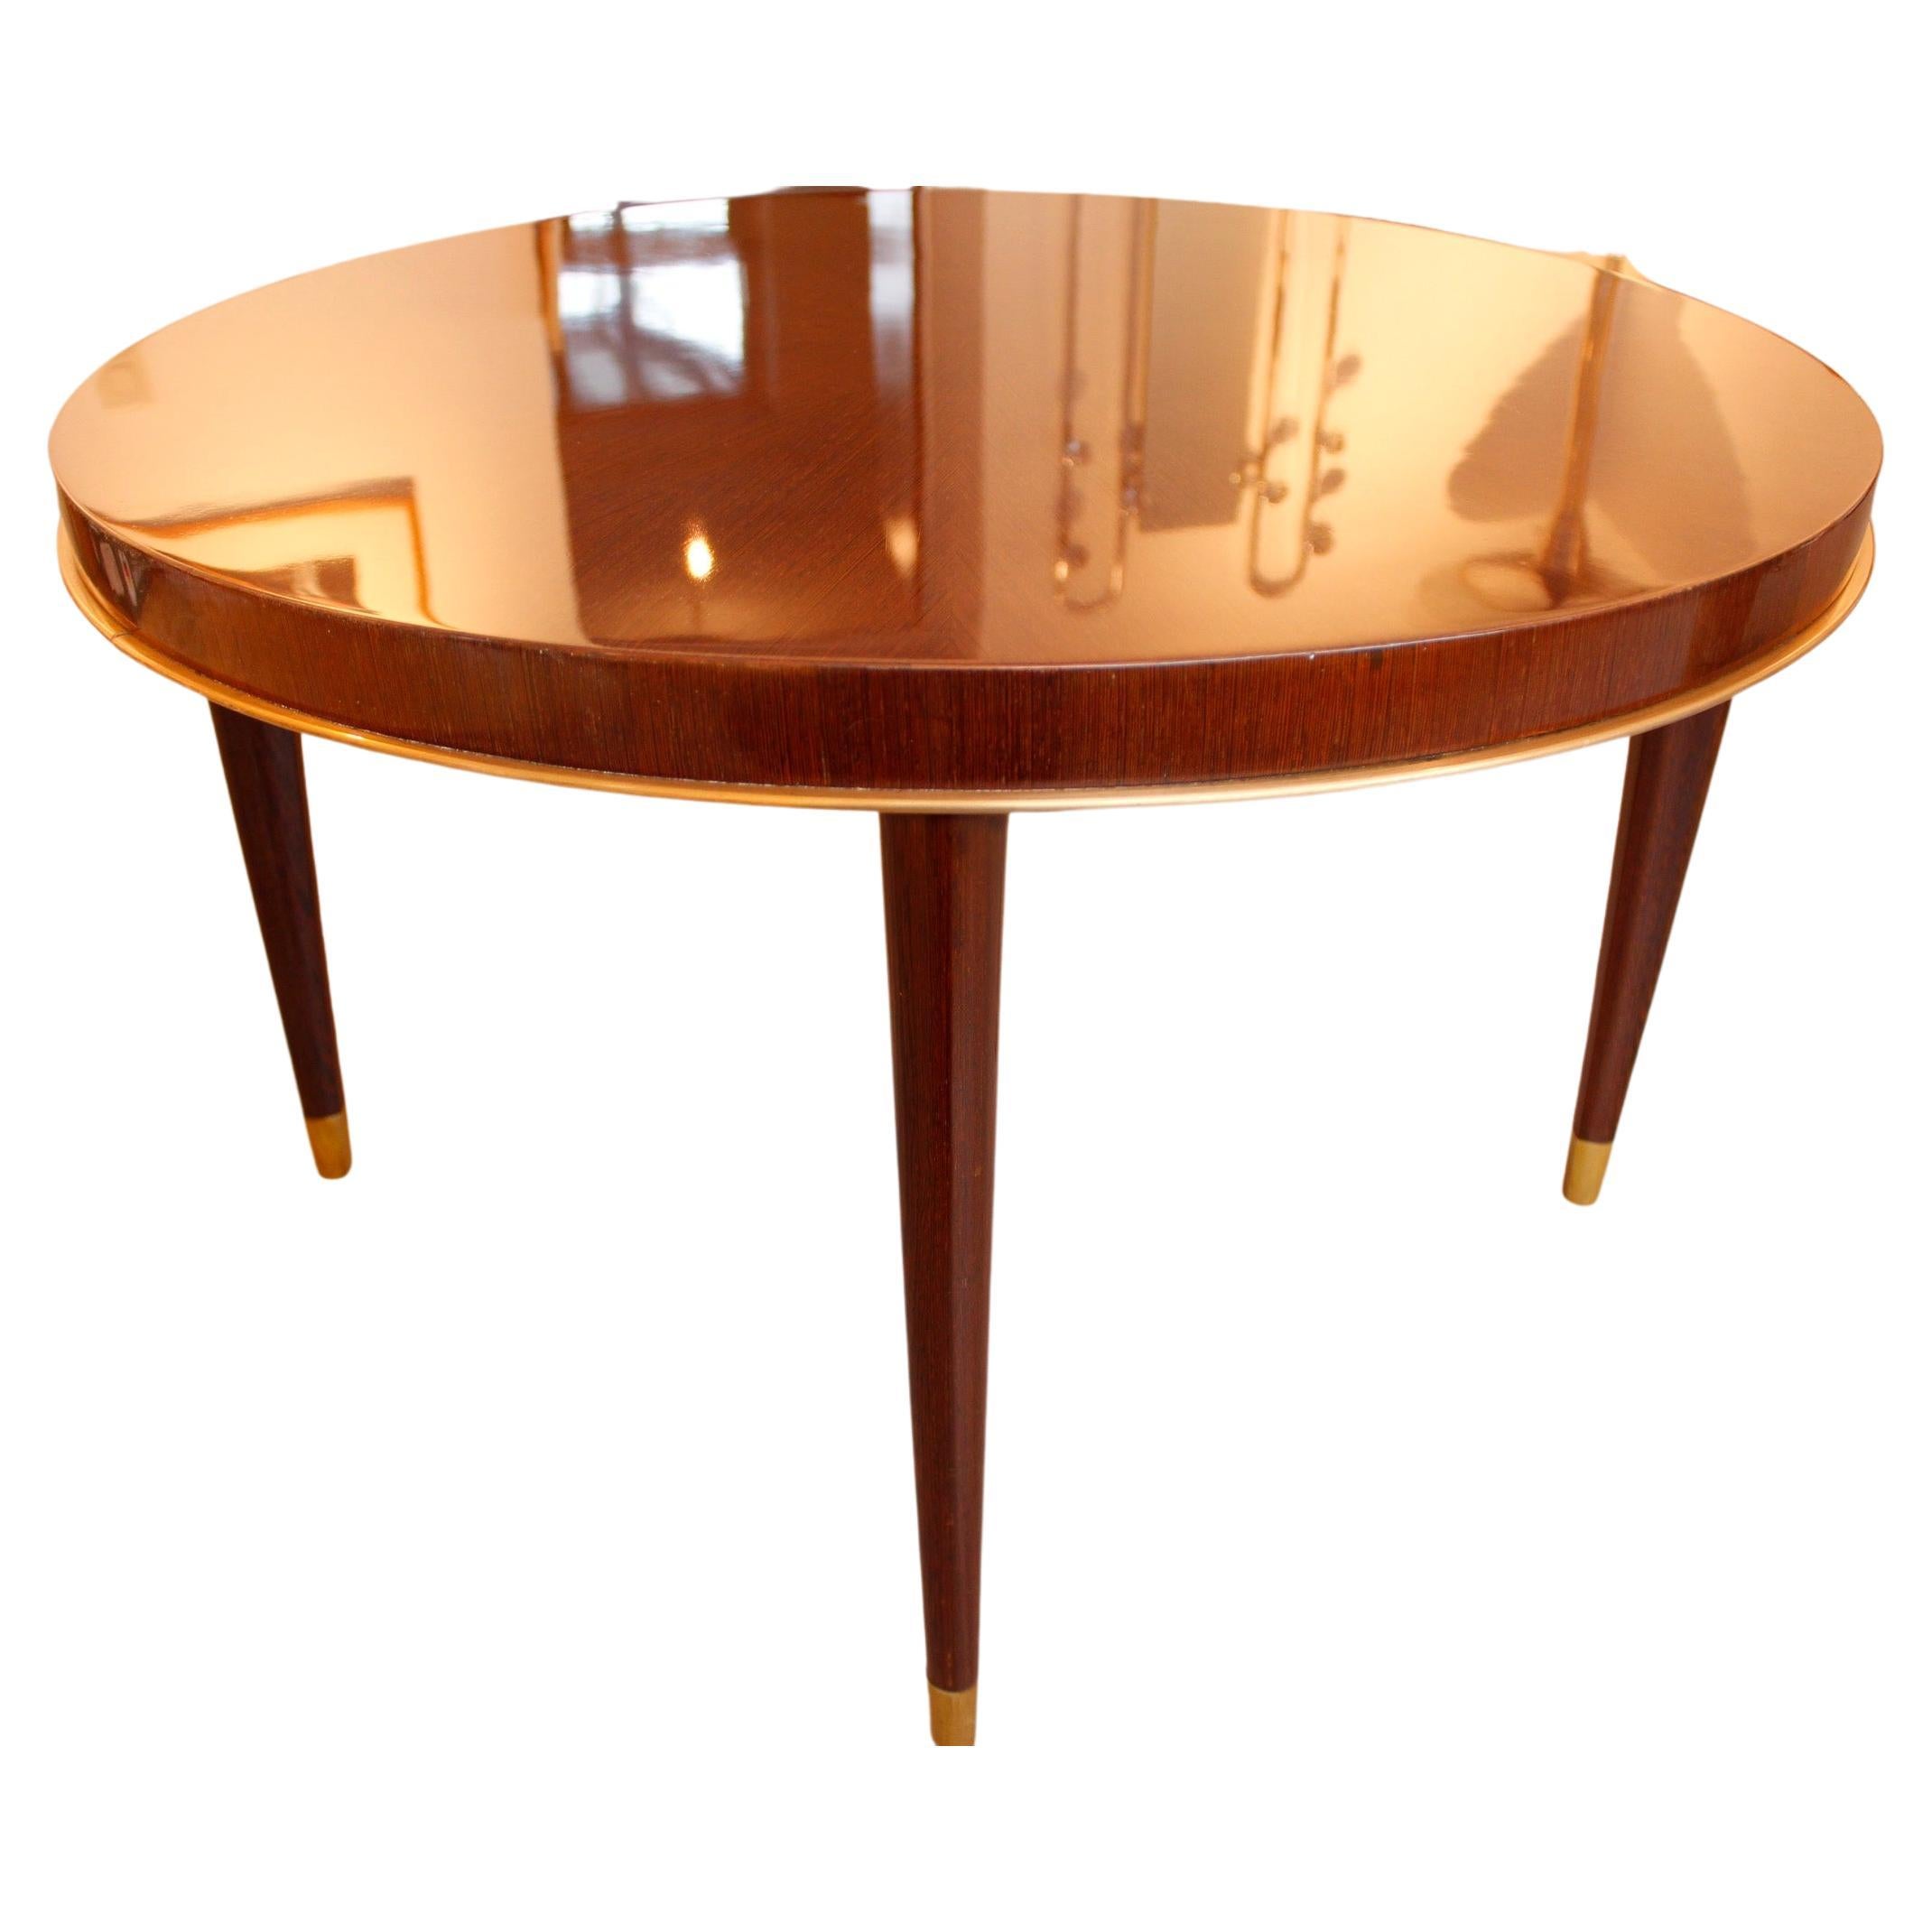 Large Round French Art Deco Coffeetable Attributed to "Maison Dominique", Paris For Sale